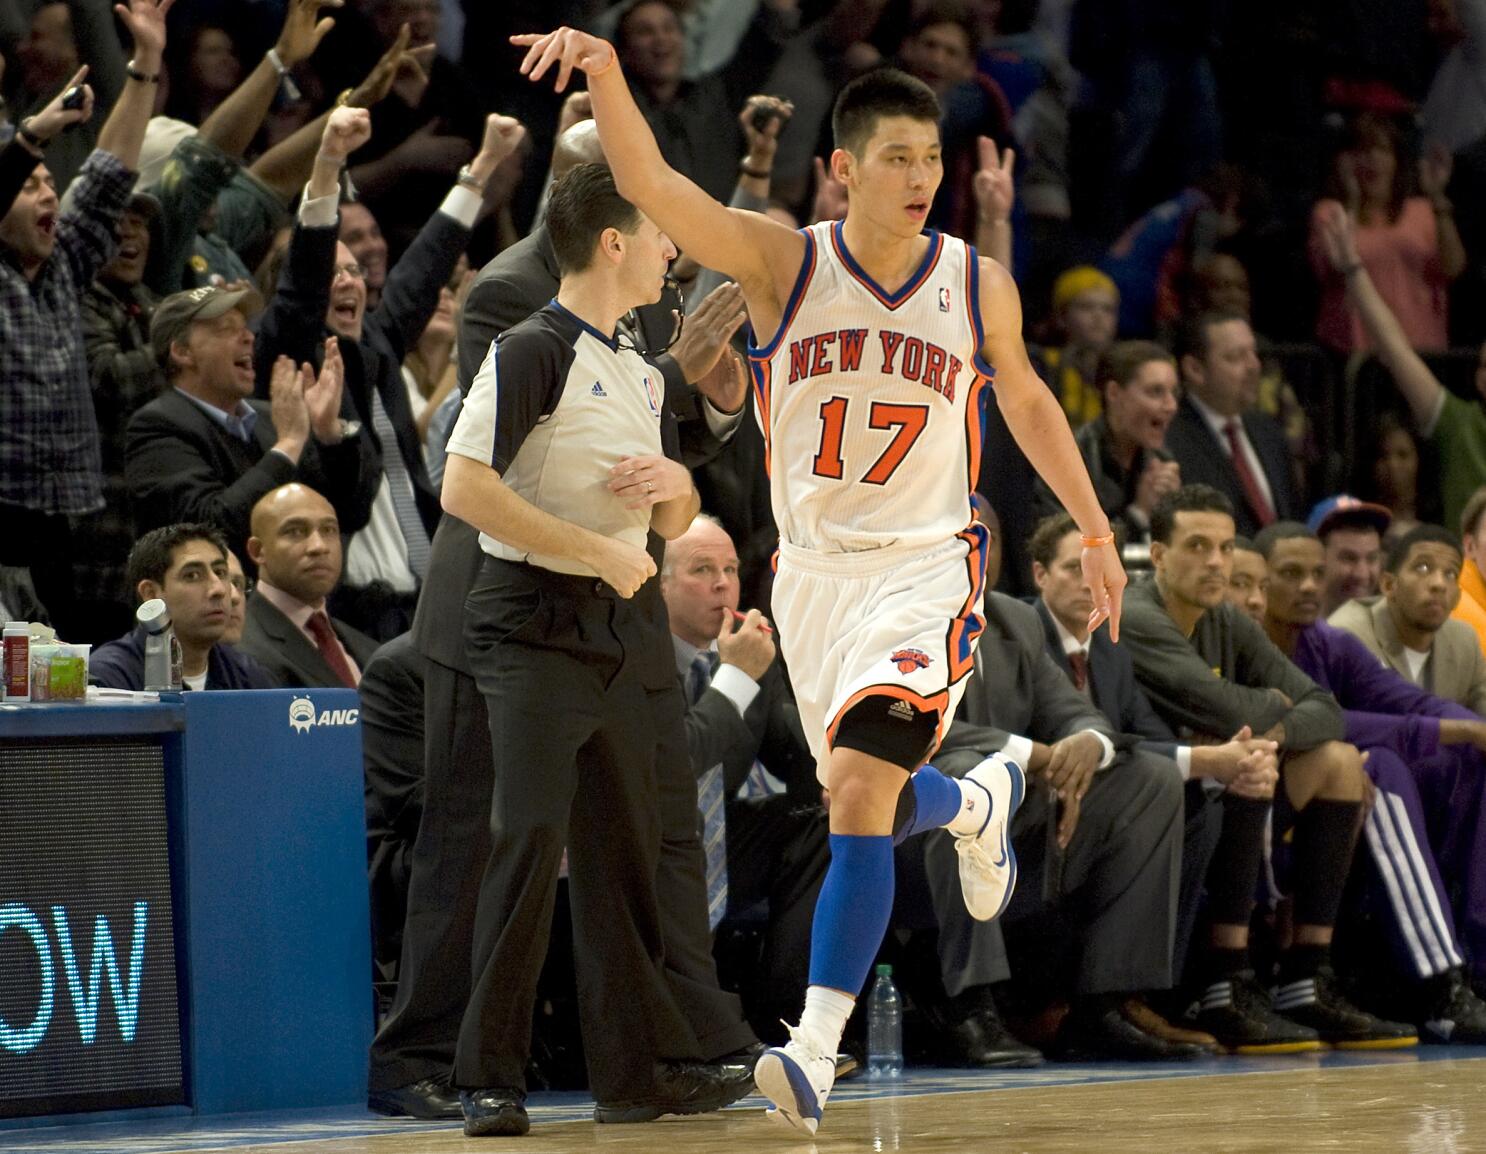 New film revisits Linsanity 10 years later amid wave of anti-Asian